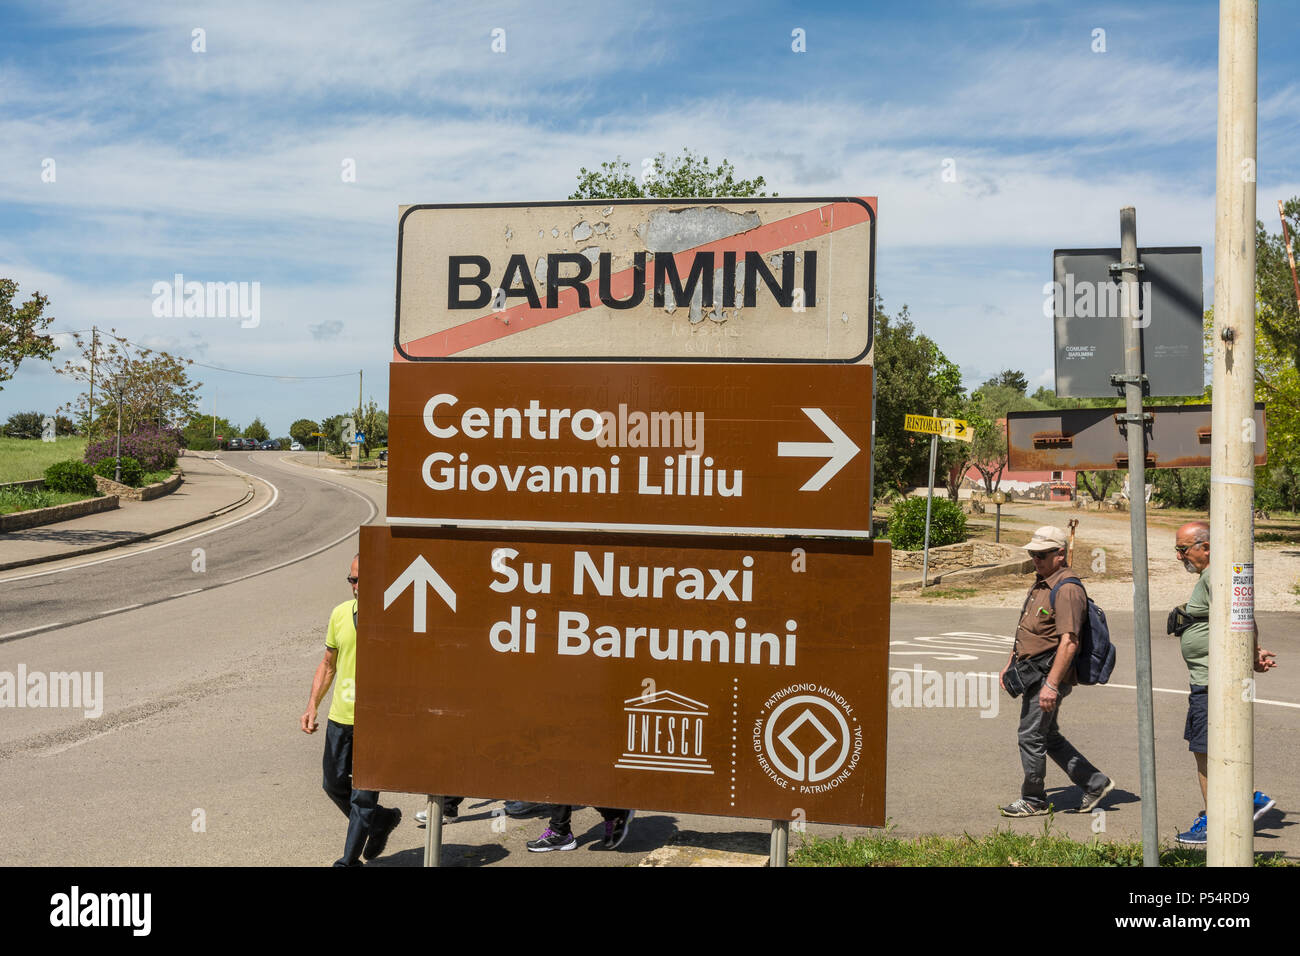 Road sign for the center of the town of Barumini and for the archaeological site of the nuragic village 'su Nuraxi' - Sardinia - Italy Stock Photo